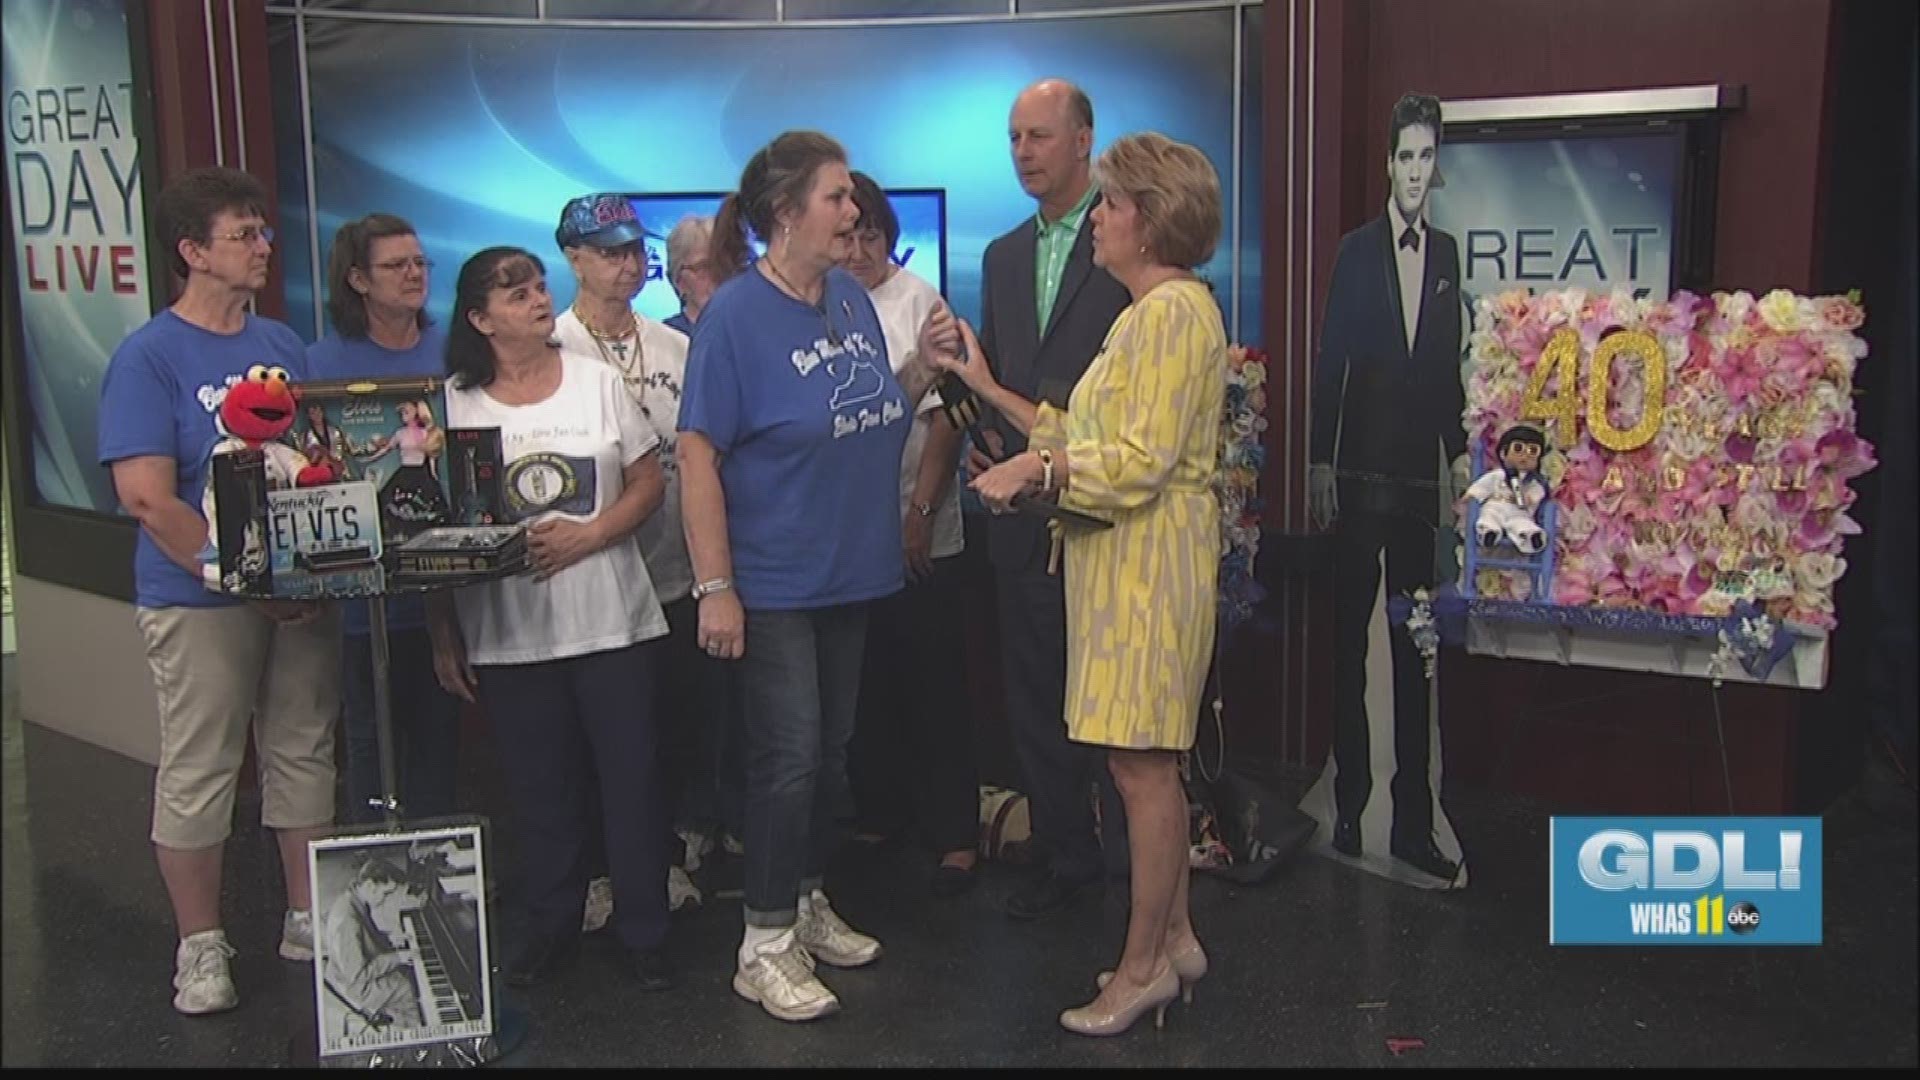 You'll find no bigger fans of "The King" Elvis Presley than the members of the Blue Moon of Kentucky fan club. A few ladies of the club join GDL to talk about how they are celebrating the life and legacy of the rock icon.